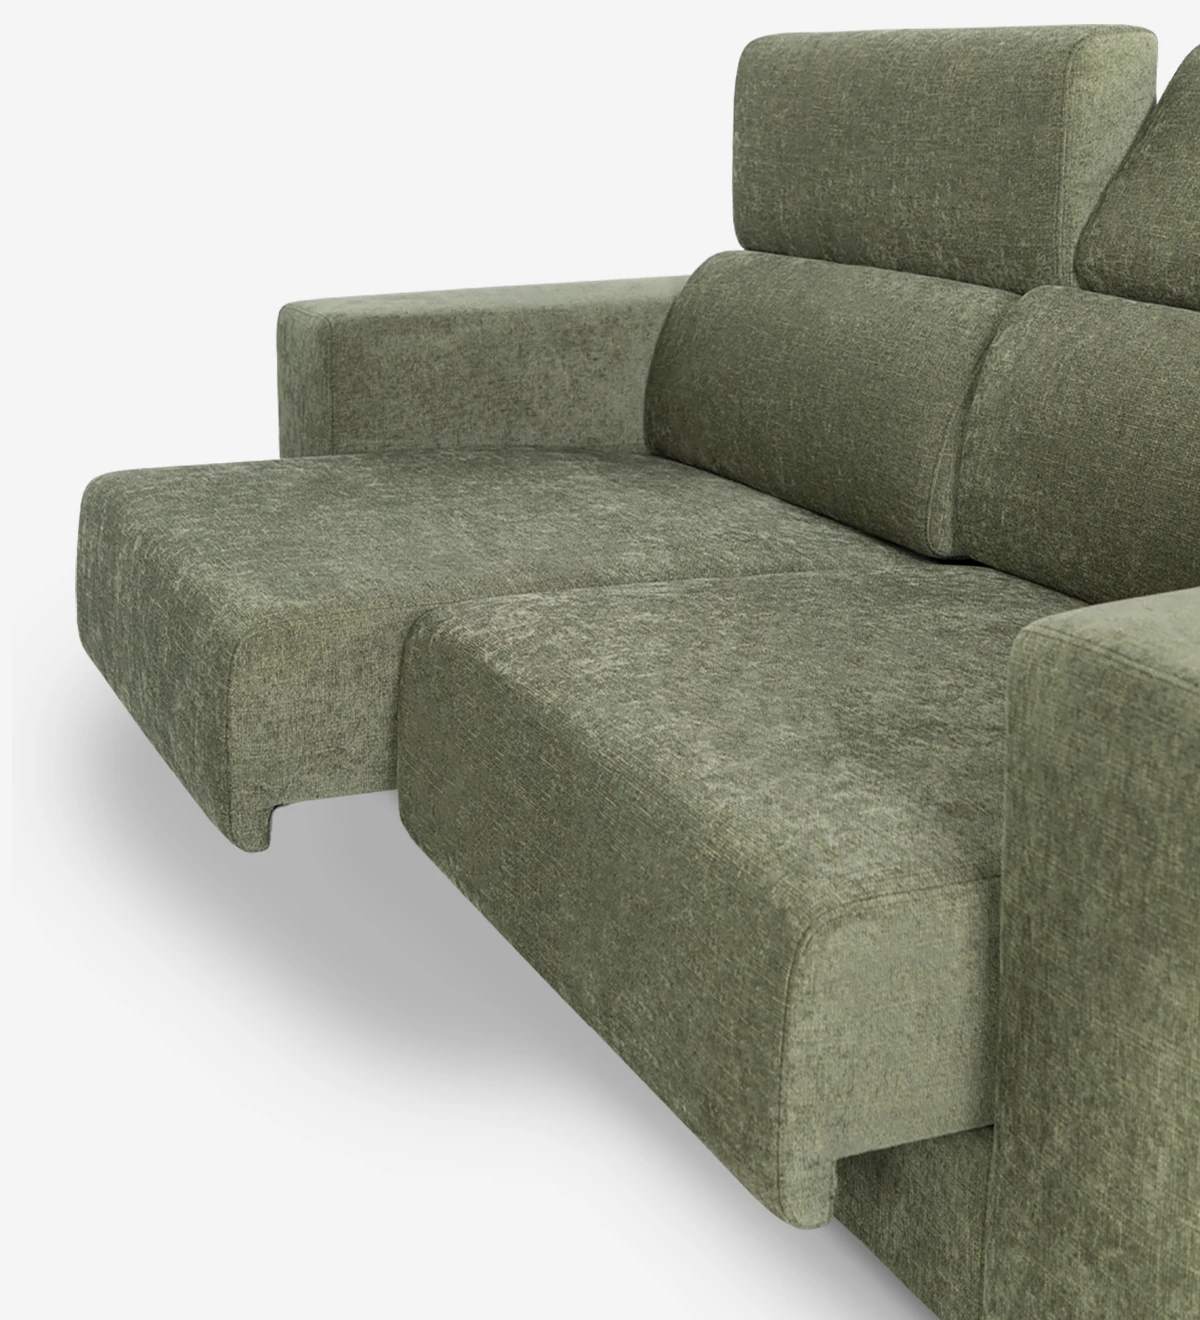 2 seater upholstered in fabric, with reclining headrests and sliding seats.